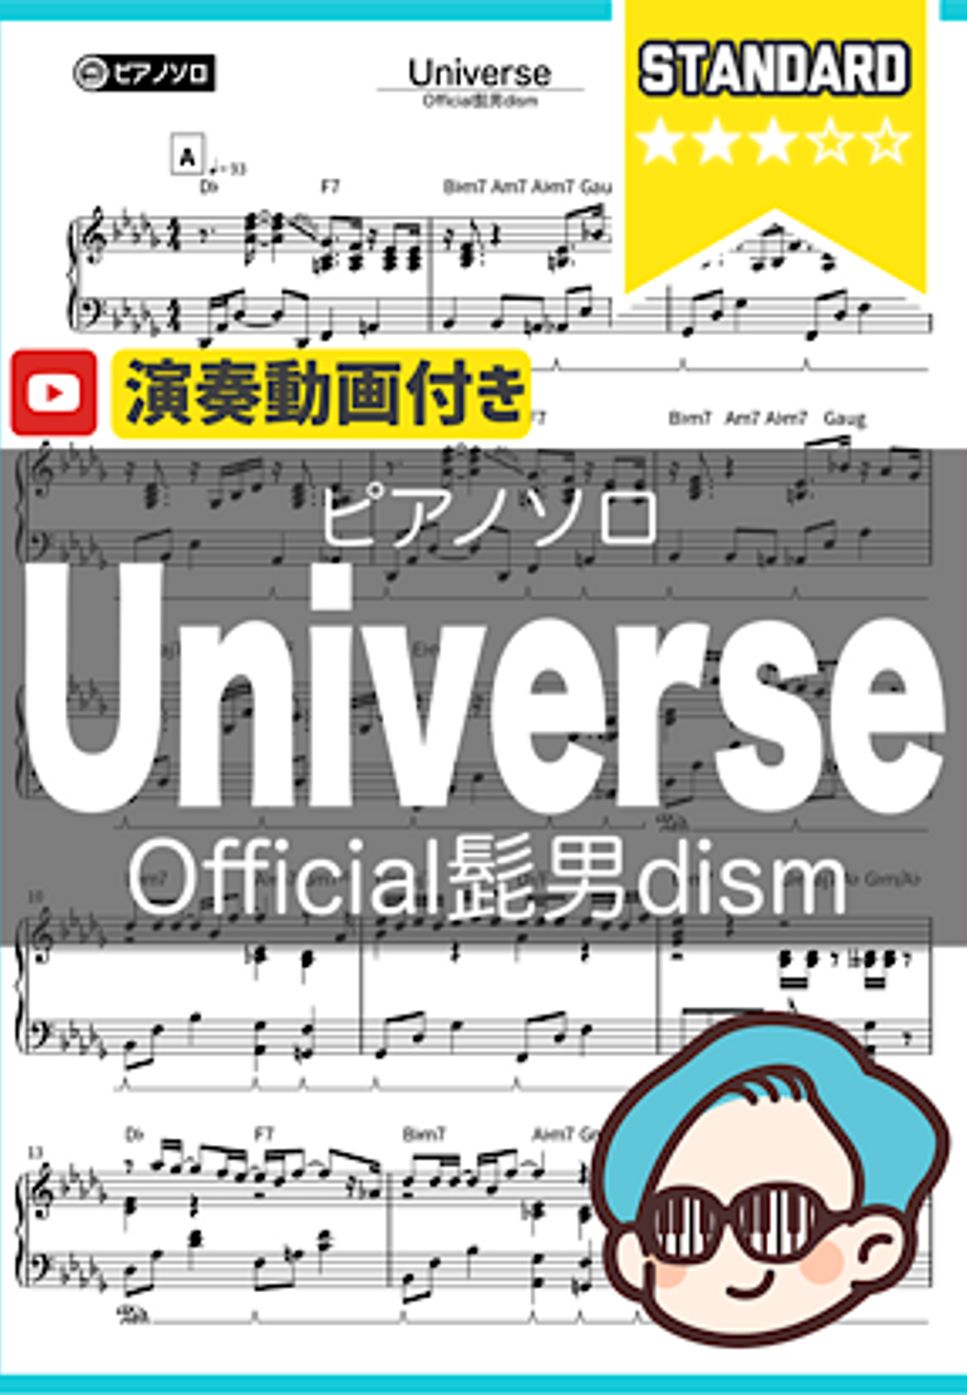 Official髭男dism - Universe by シータピアノ